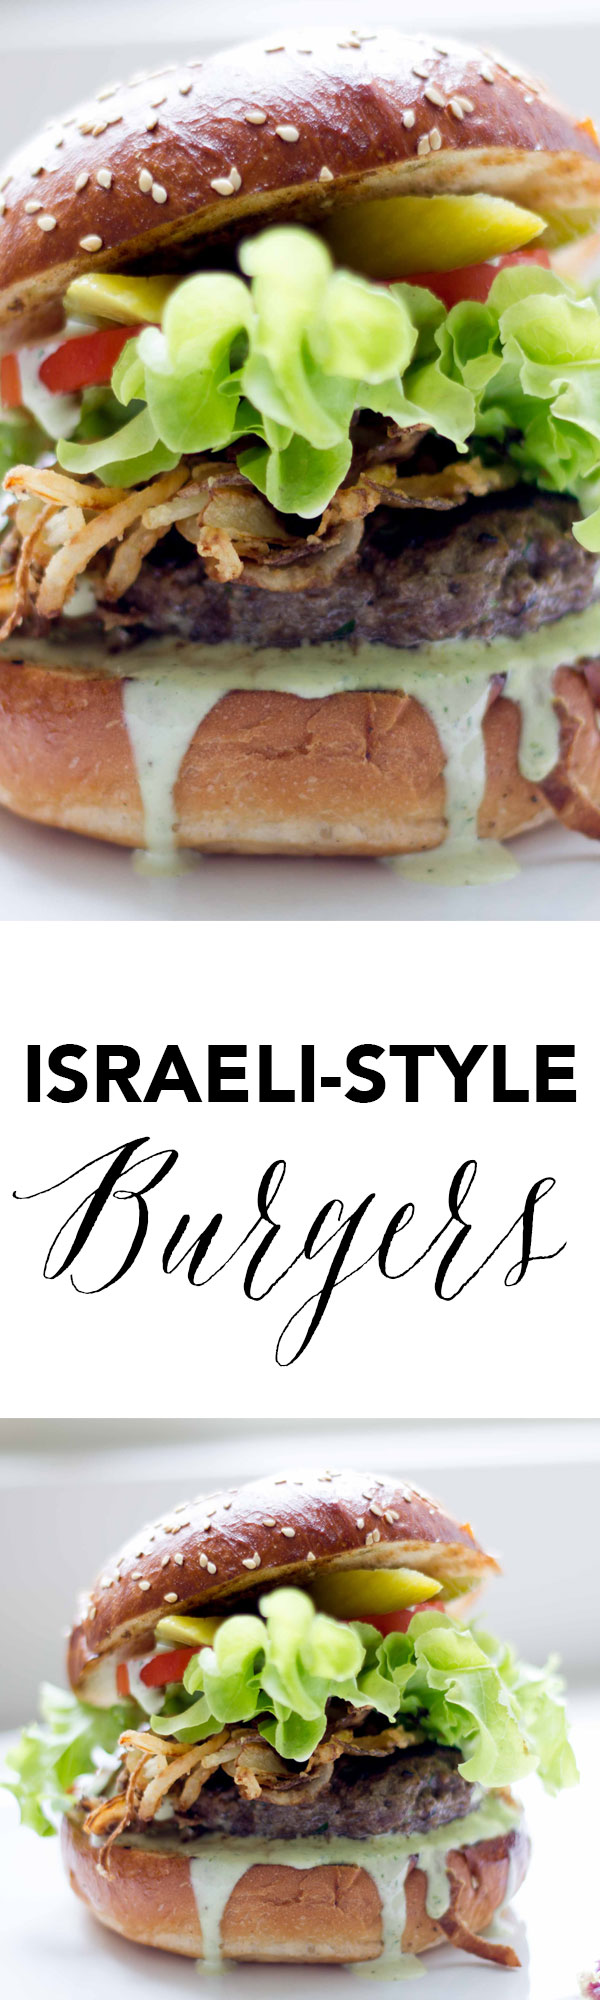 These Israeli style burgers are a great twist on a classic with za'atar spiced buns, spicy green tahini sauce, and middle-eastern flavored beef patties!